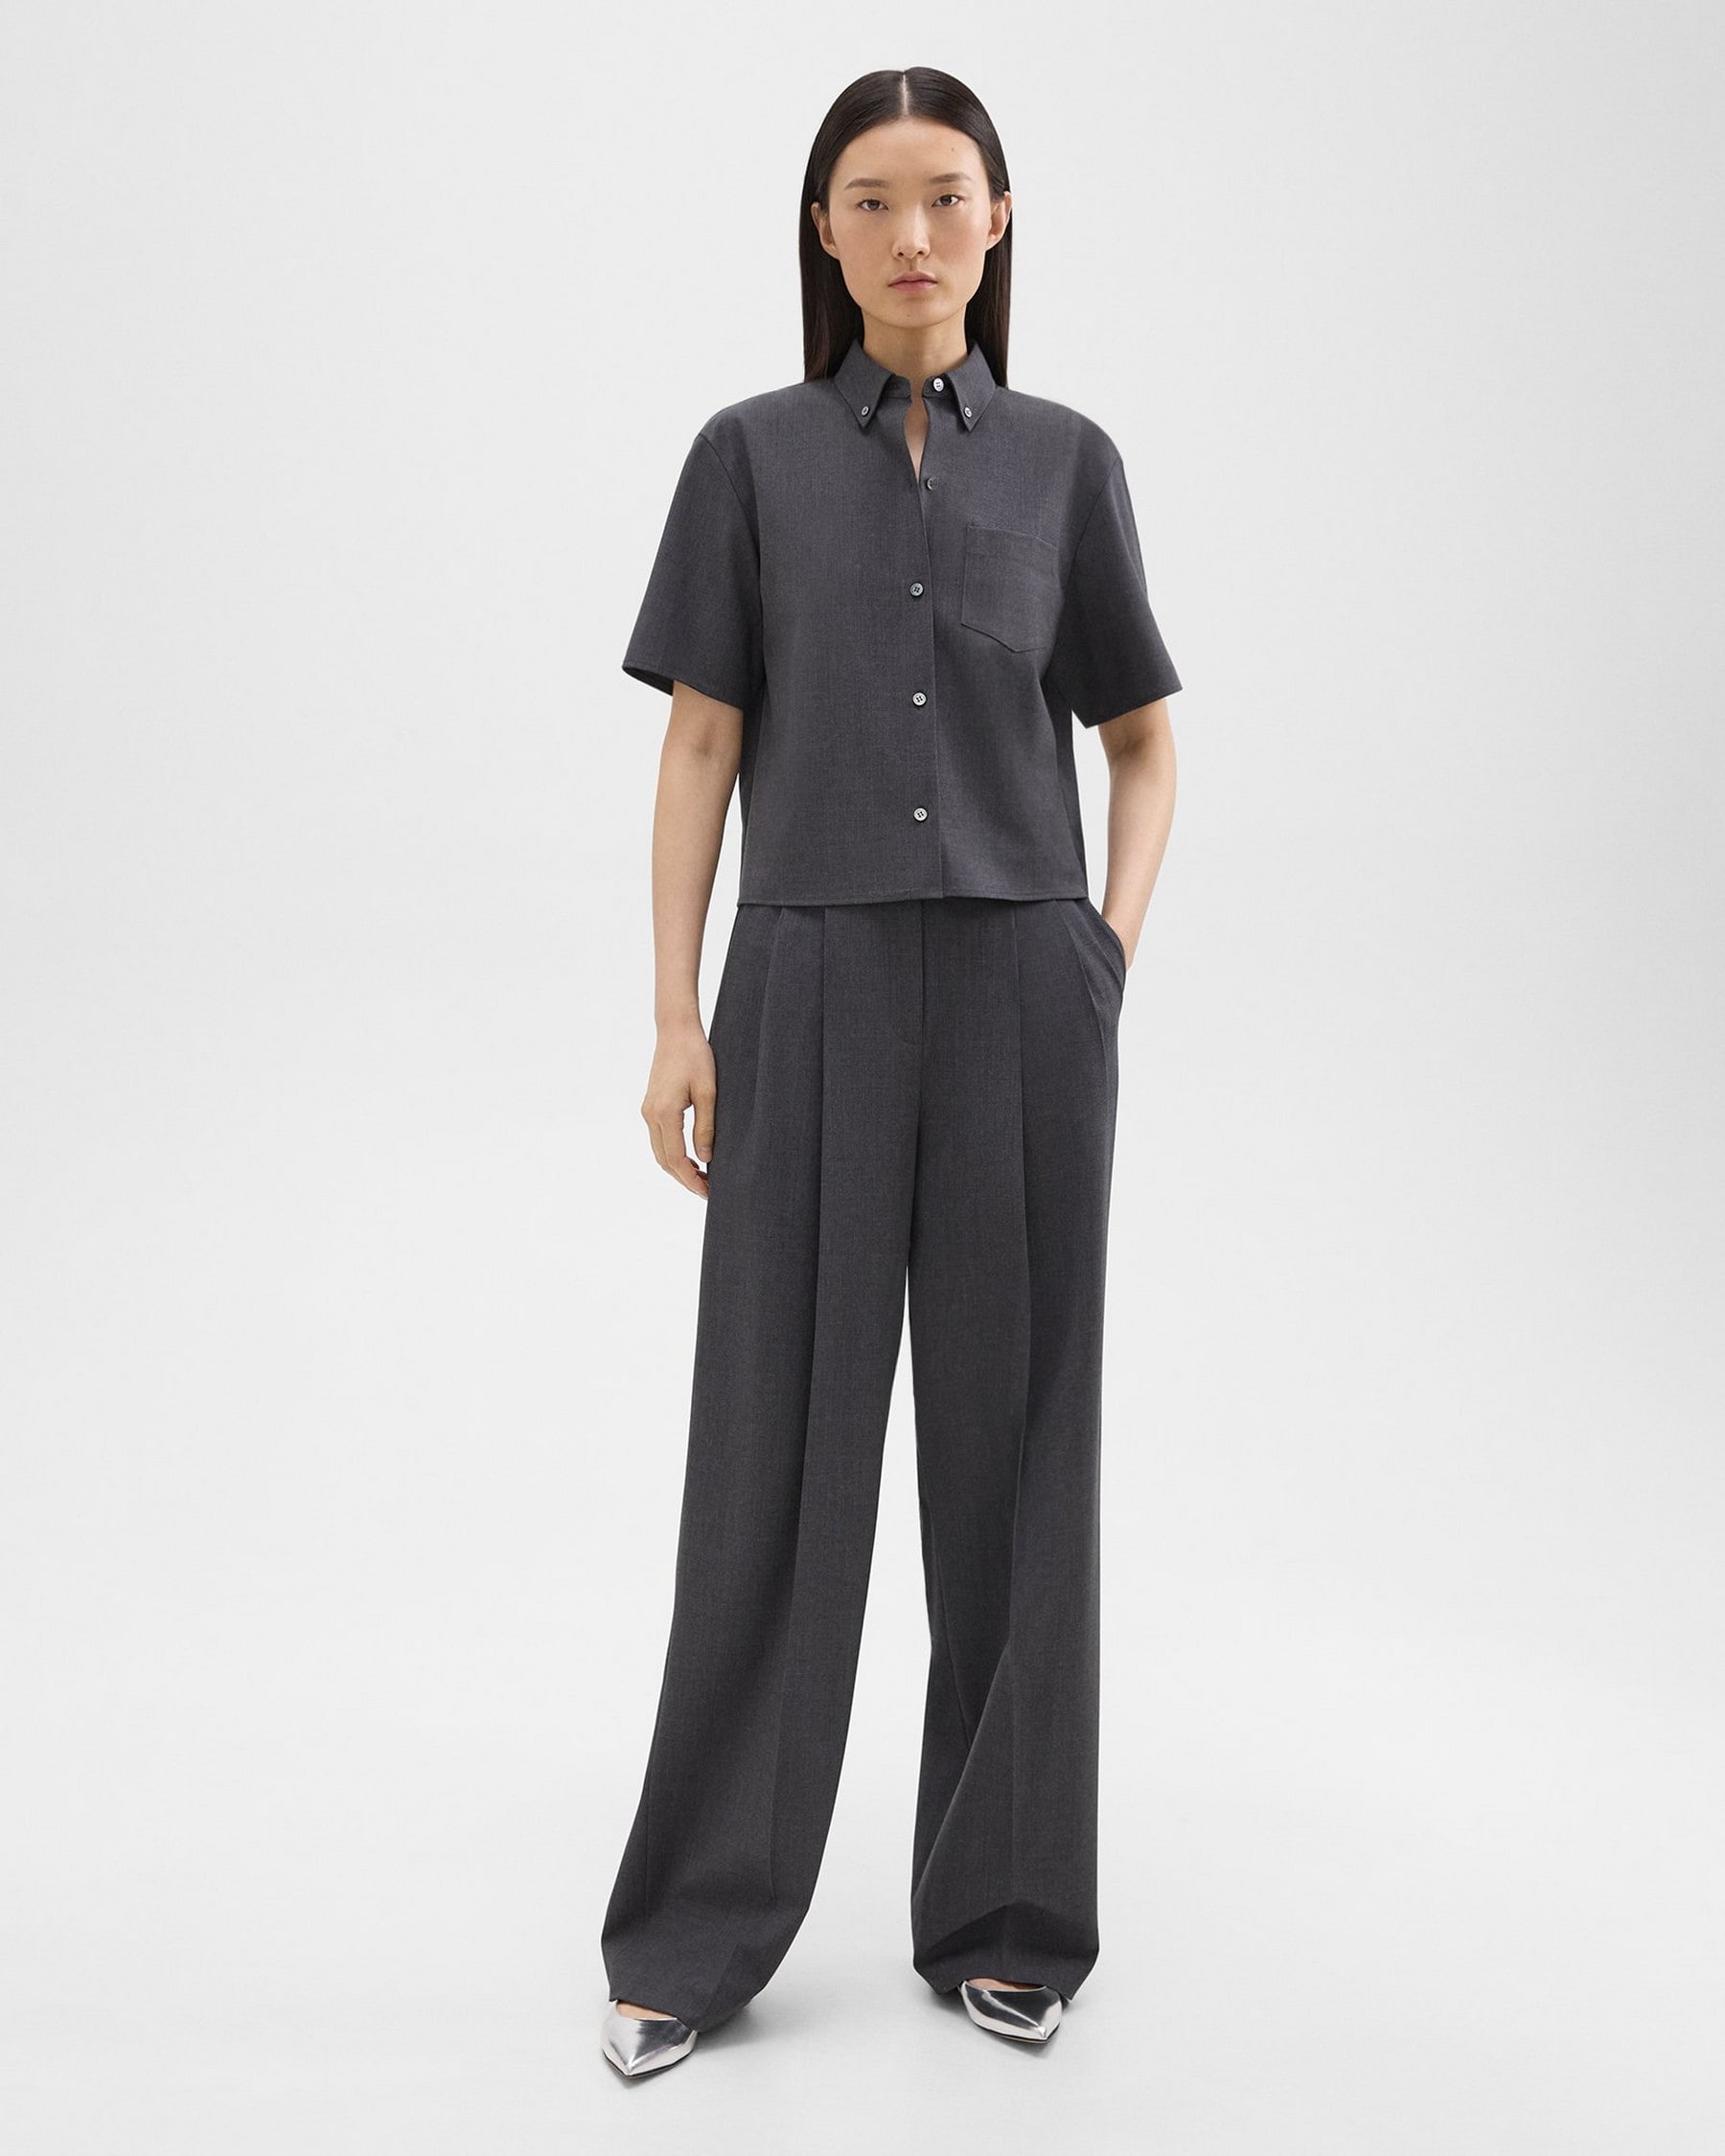 Double Pleat Pant in Good Wool